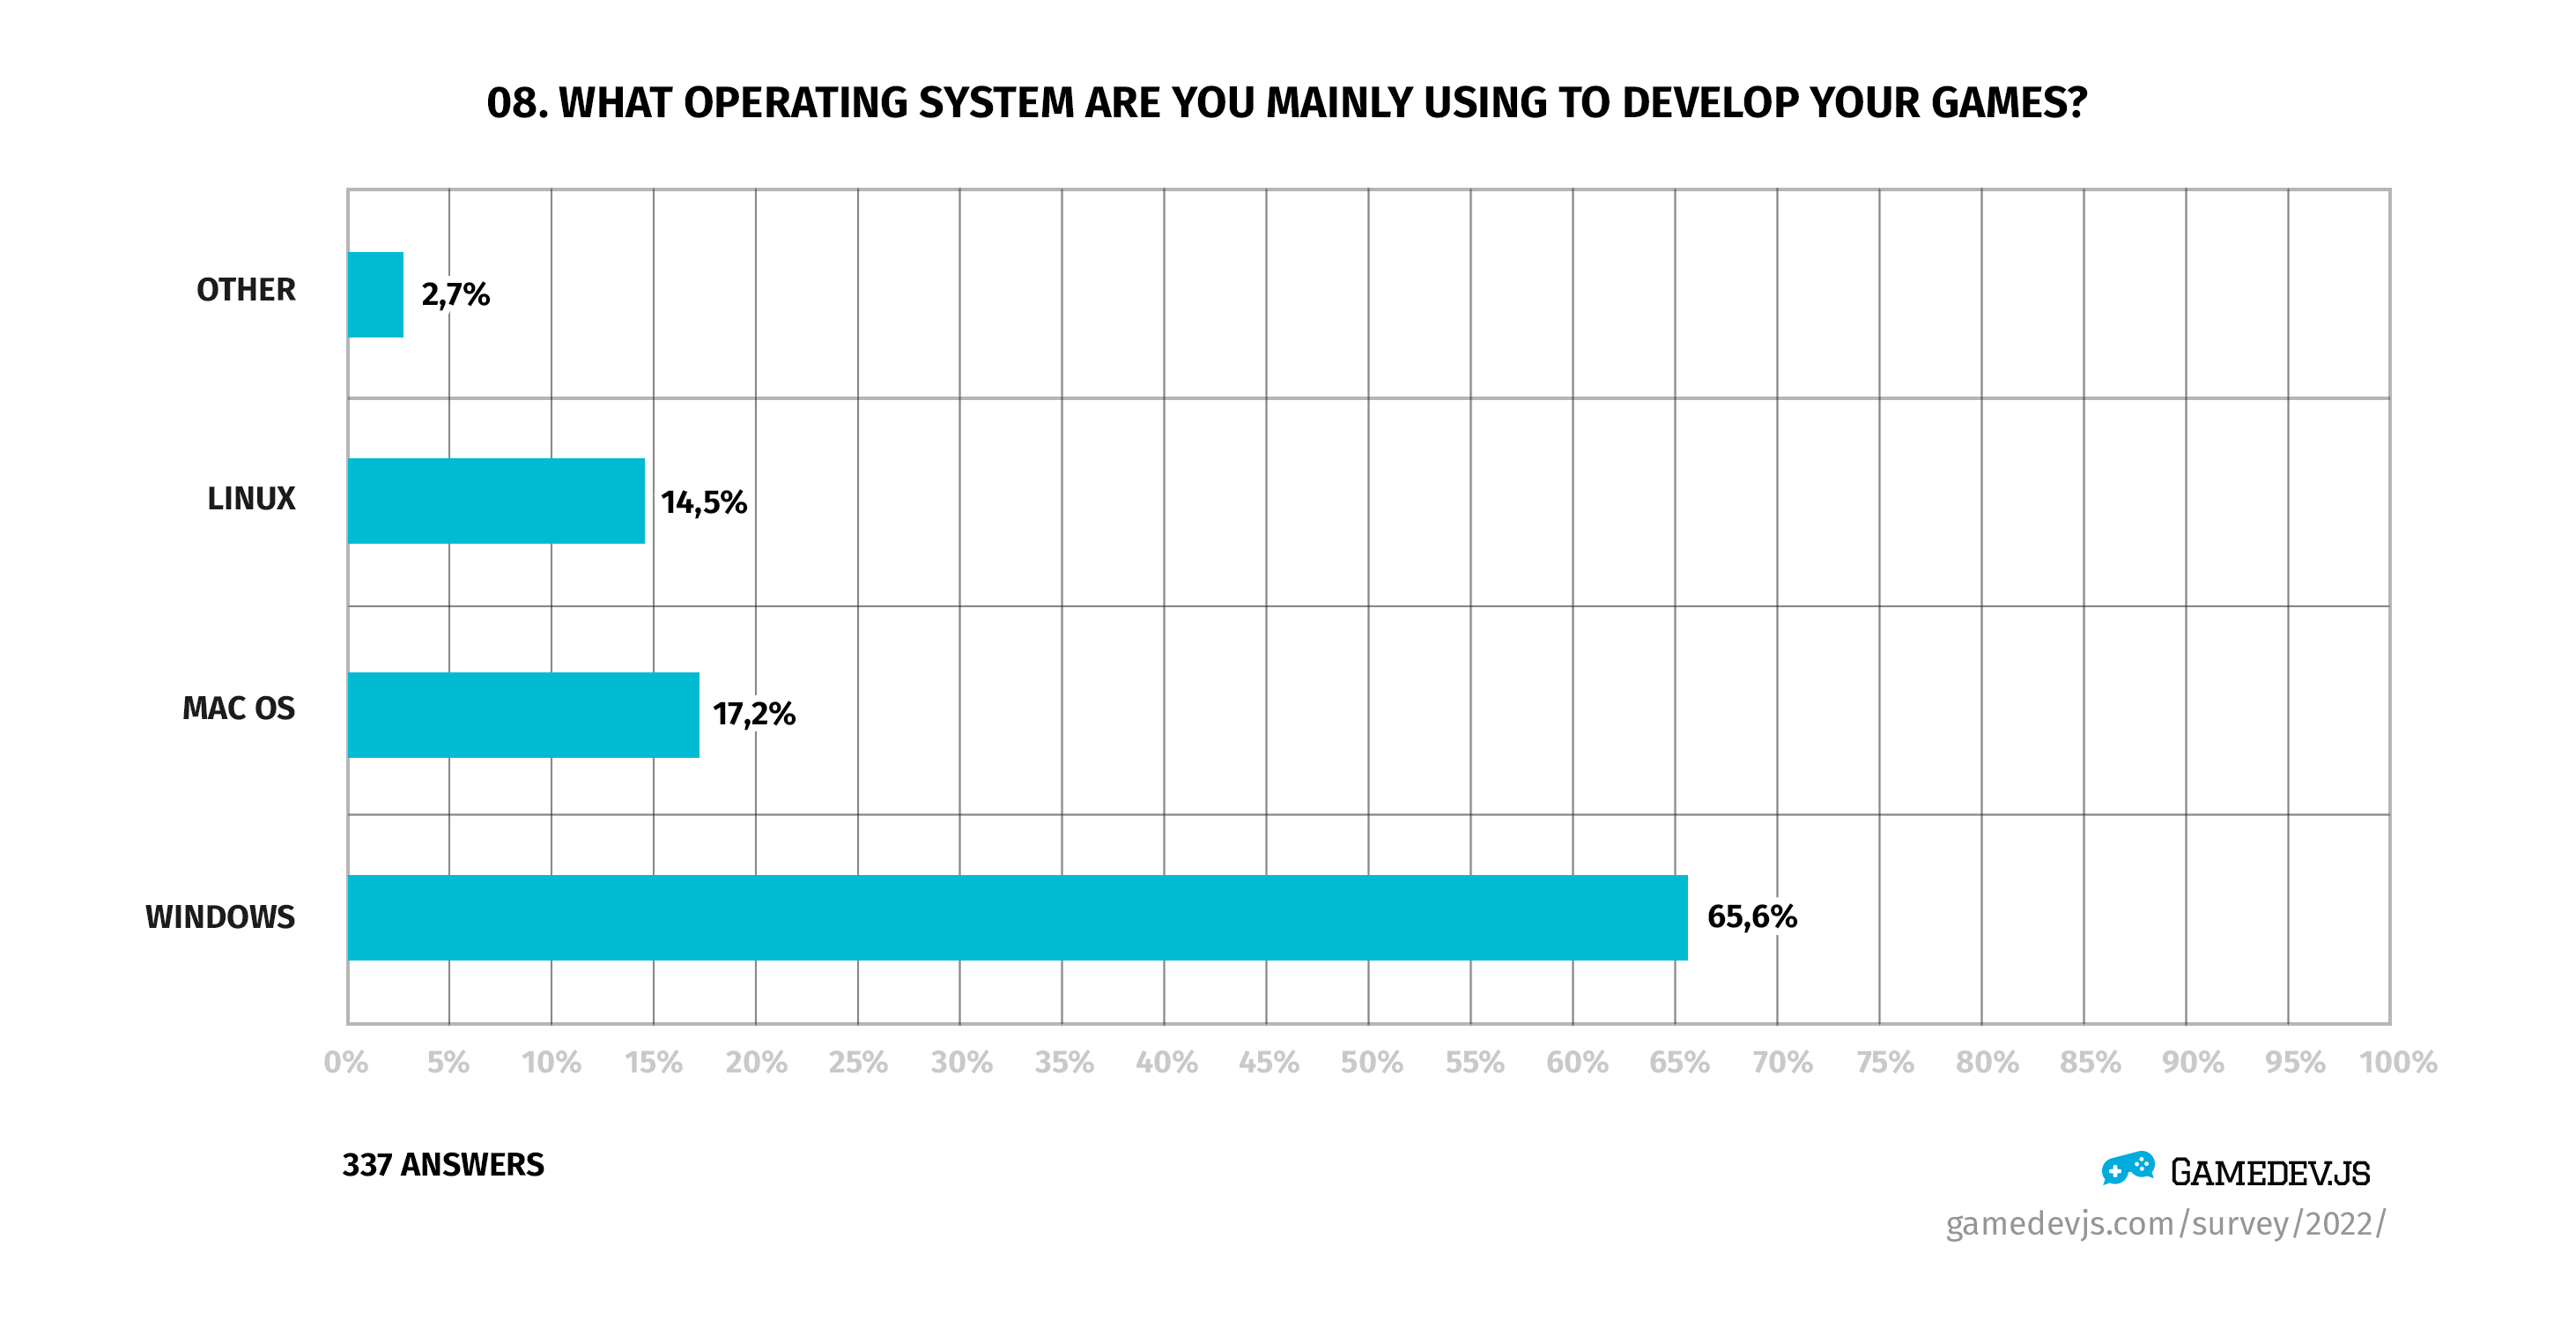 Gamedev.js Survey 2022 - Question #8: What operating system are you mainly using to develop your games?